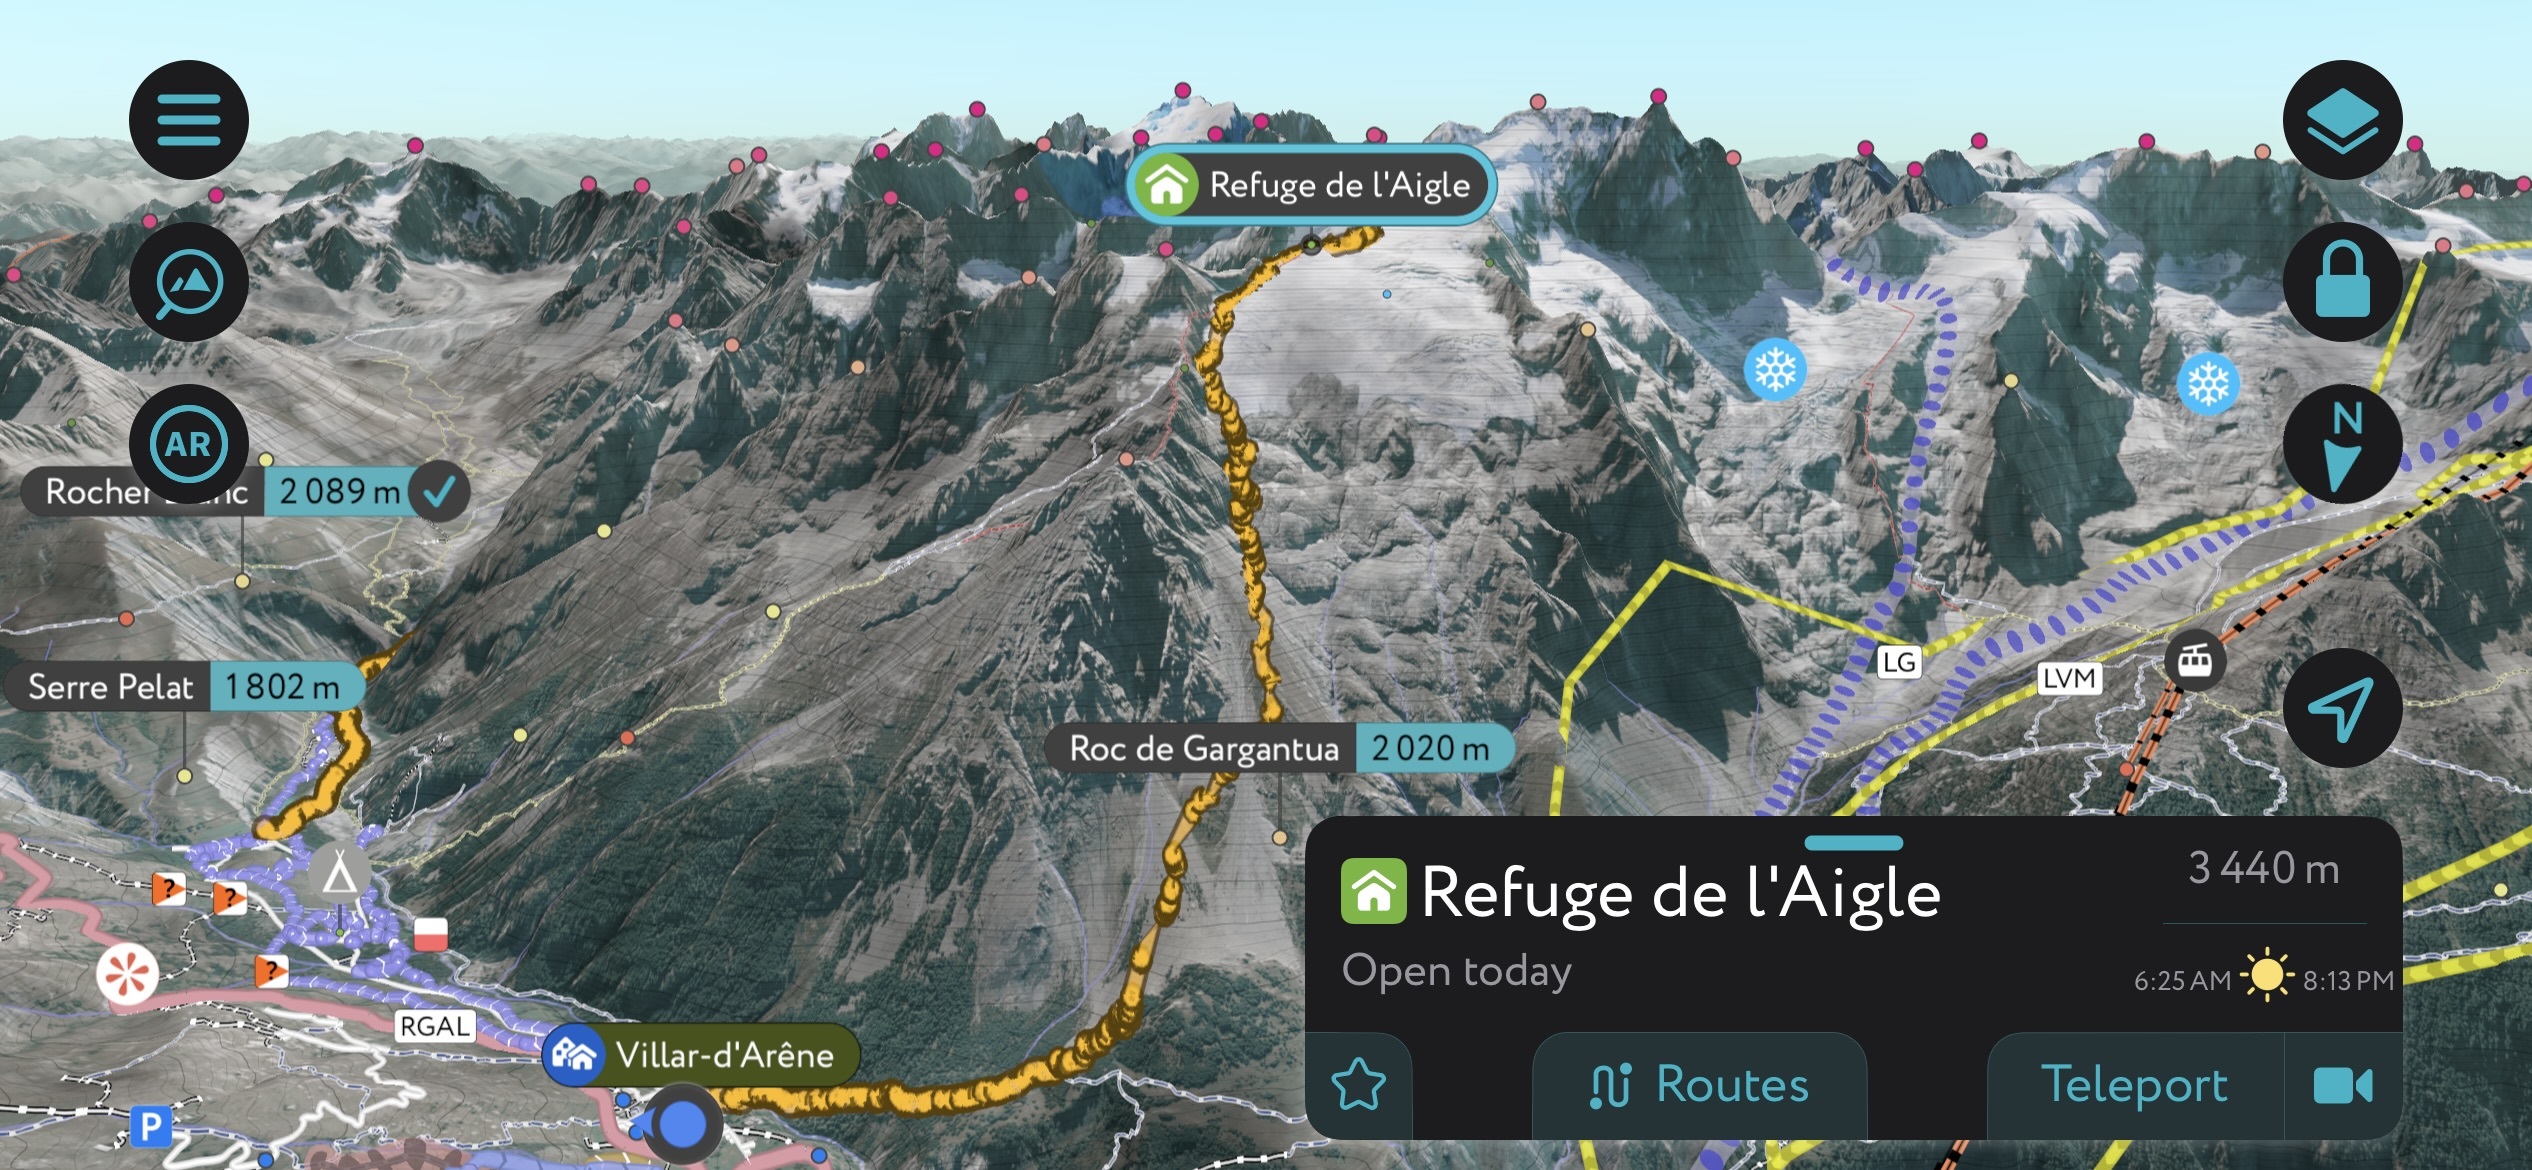 Our route up to the Aigle. It’s a straightforward route, so you don’t need to follow a GPS track. That said, locating the refuge in the storm would have been more difficult without the app. Refuge d’Aigle